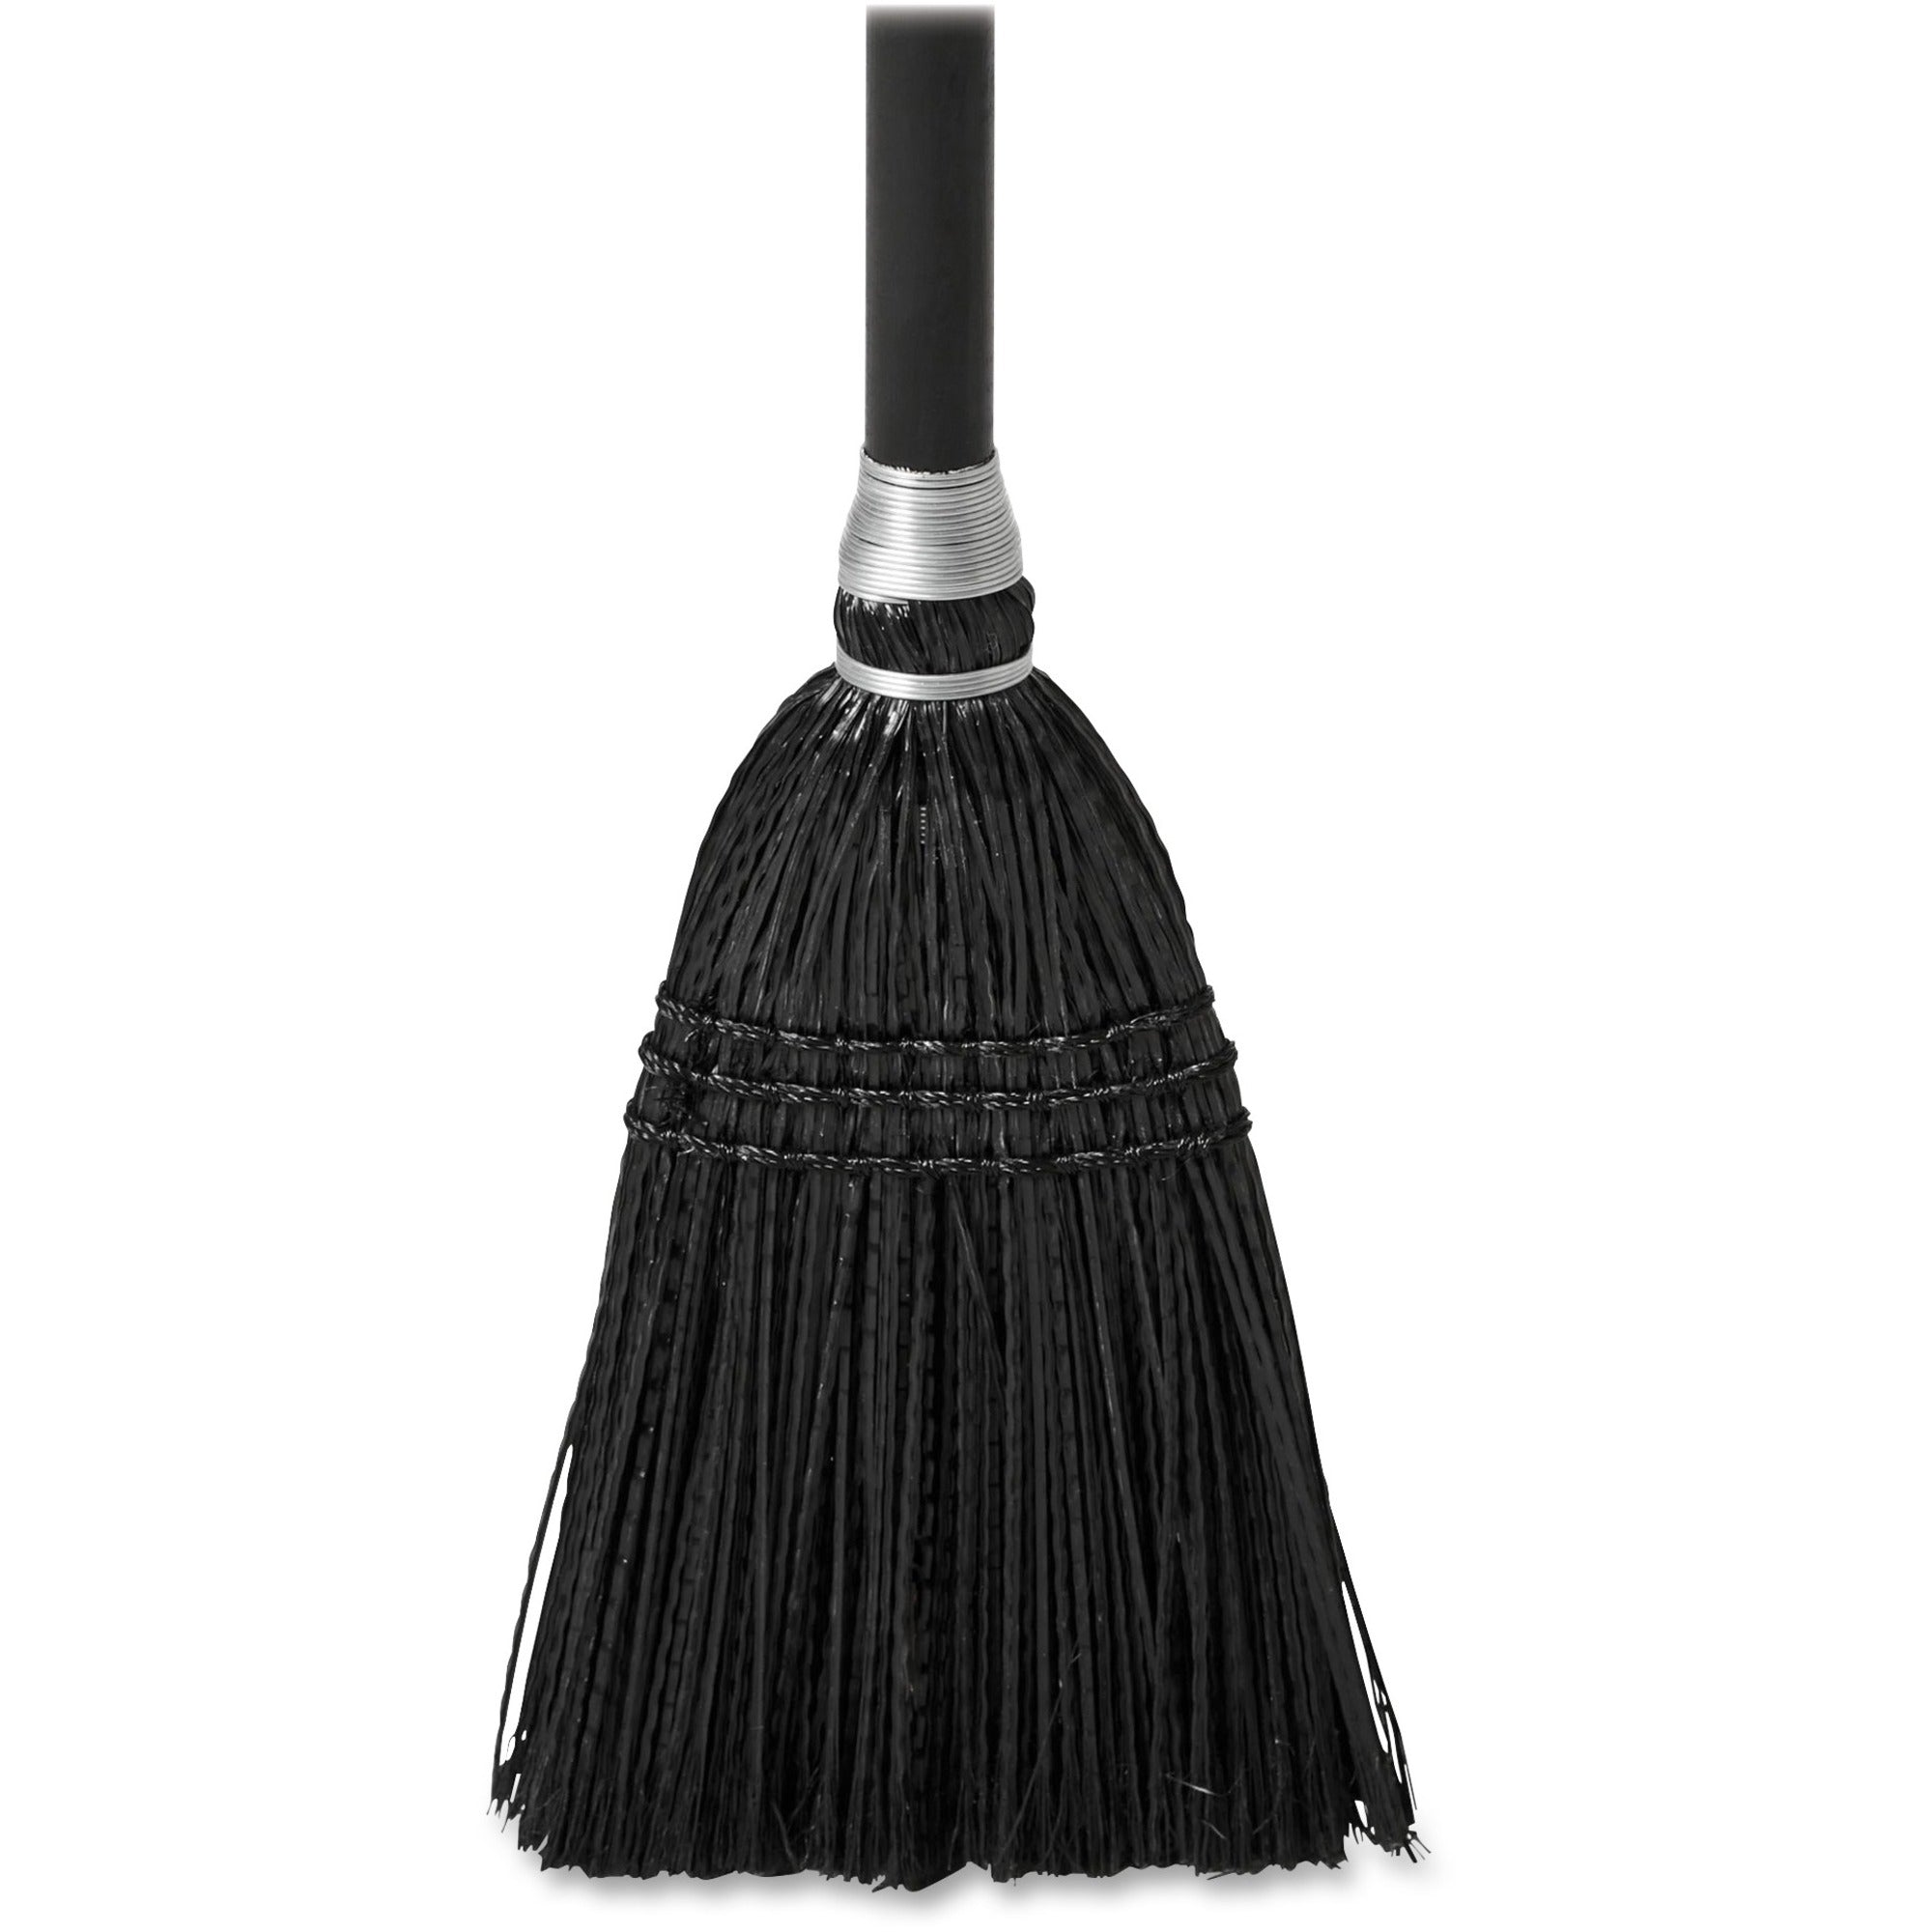 rubbermaid-commercial-executive-series-lobby-broom-synthetic-bristle-7-overall-length-wood-handle-12-carton_rcp2536ct - 1